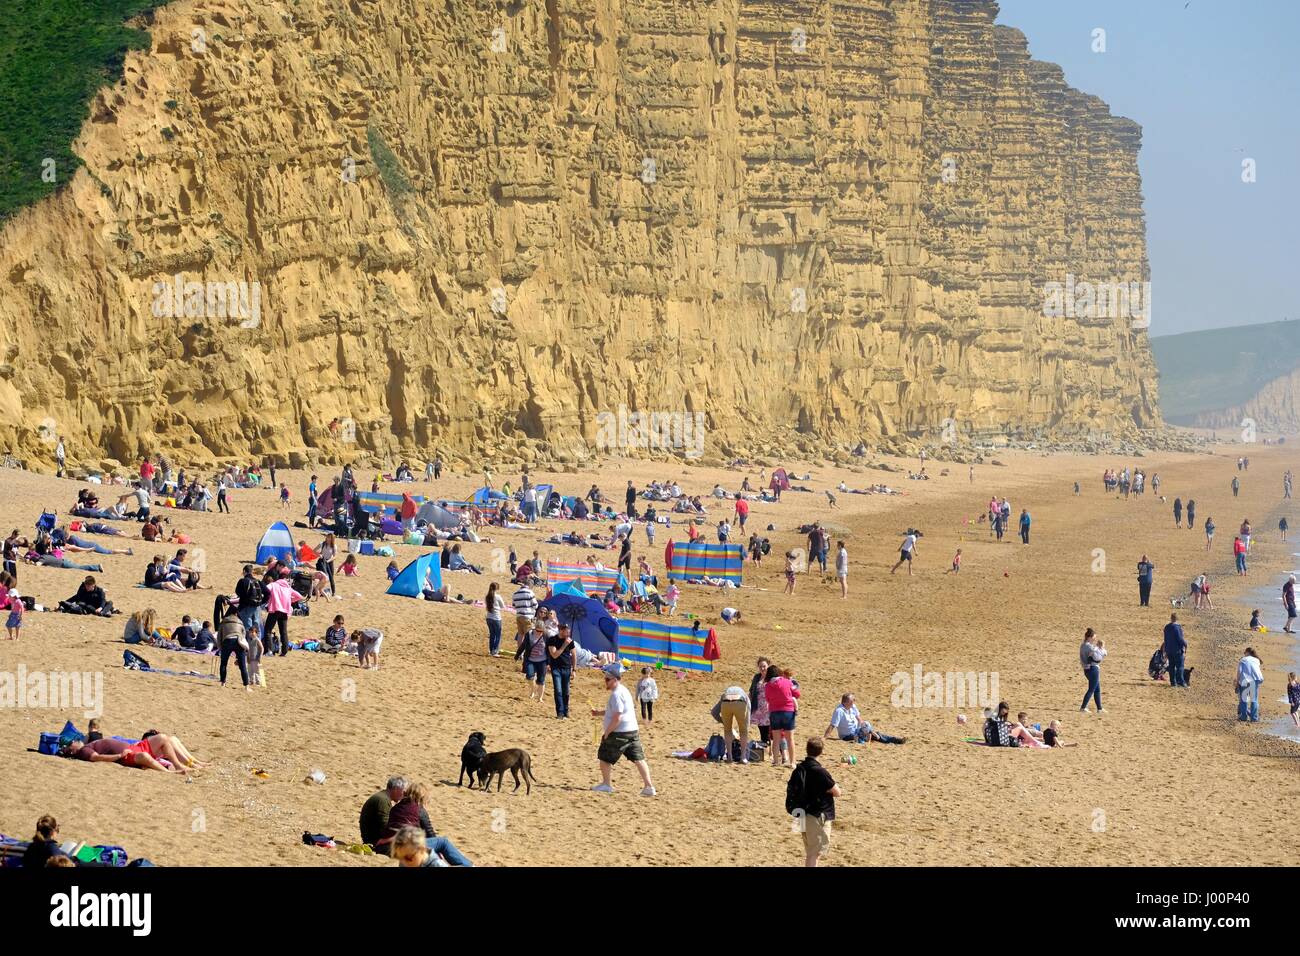 West Bay, Dorset, UK. 8th Apr, 2017. Crowds flock to West Bay beach in Dorset to enjoy what looks like the warmest day of the year. Credit: Tom Corban/Alamy Live News Stock Photo